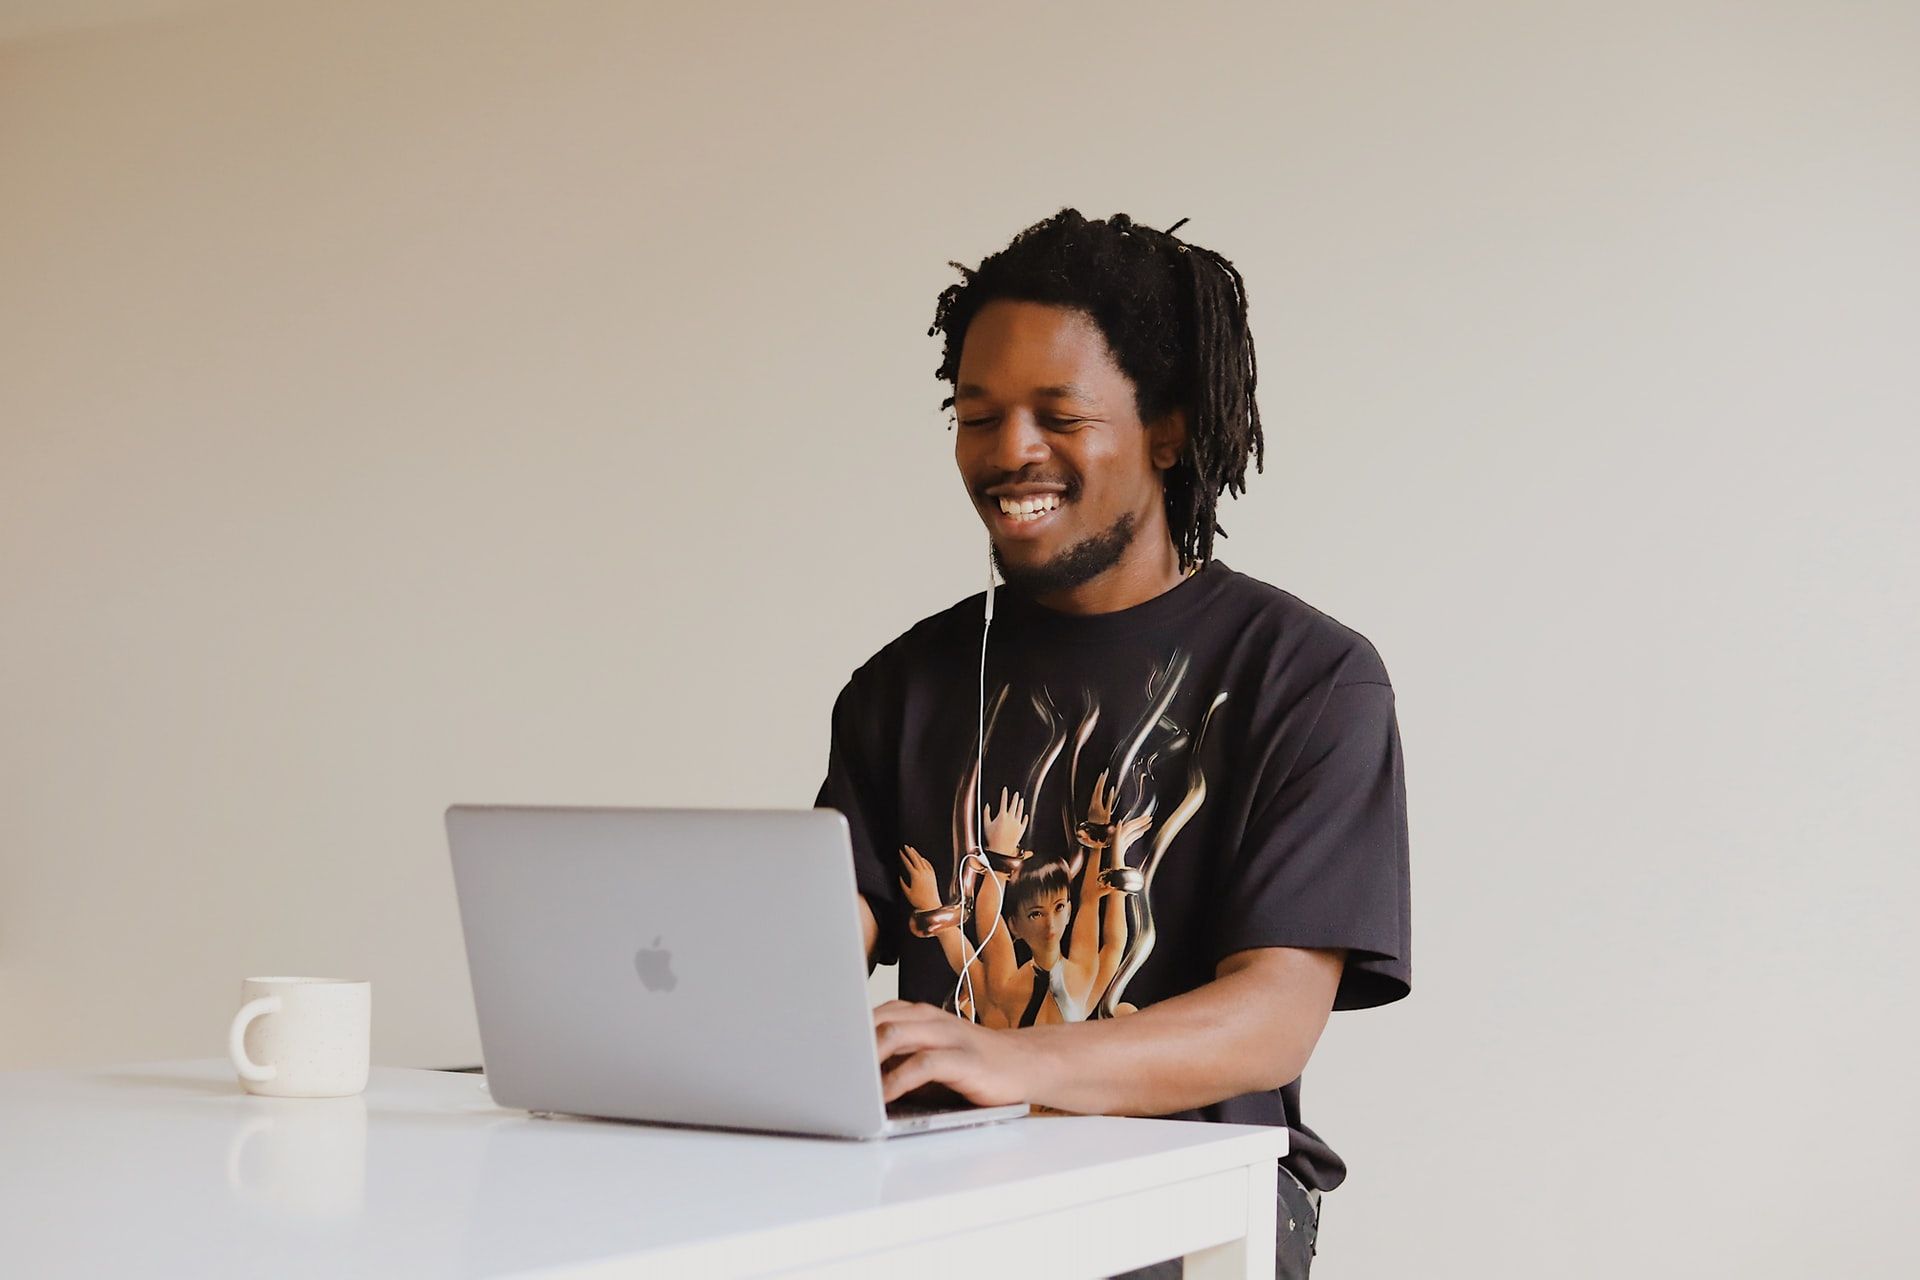 A person smiling using their macbook.